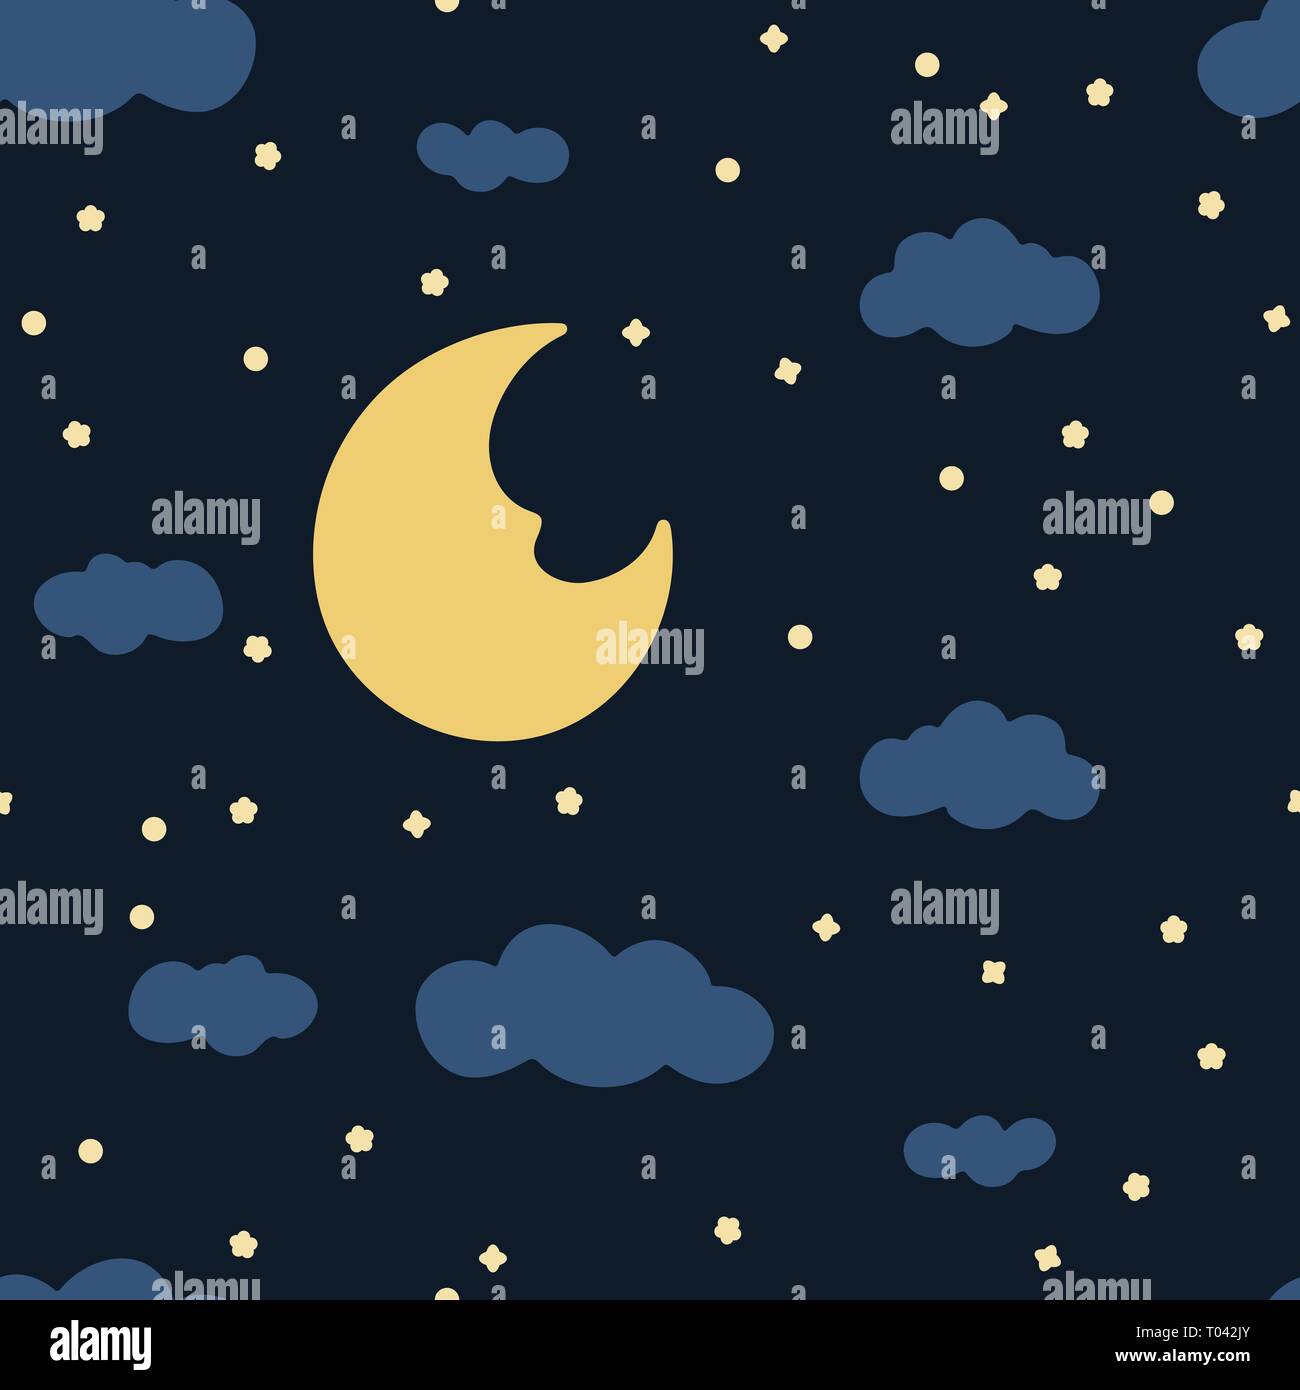 Night sky. Seamless pattern background. Vector illustration. Moon, clouds and stars. Sweet dreams Stock Vector